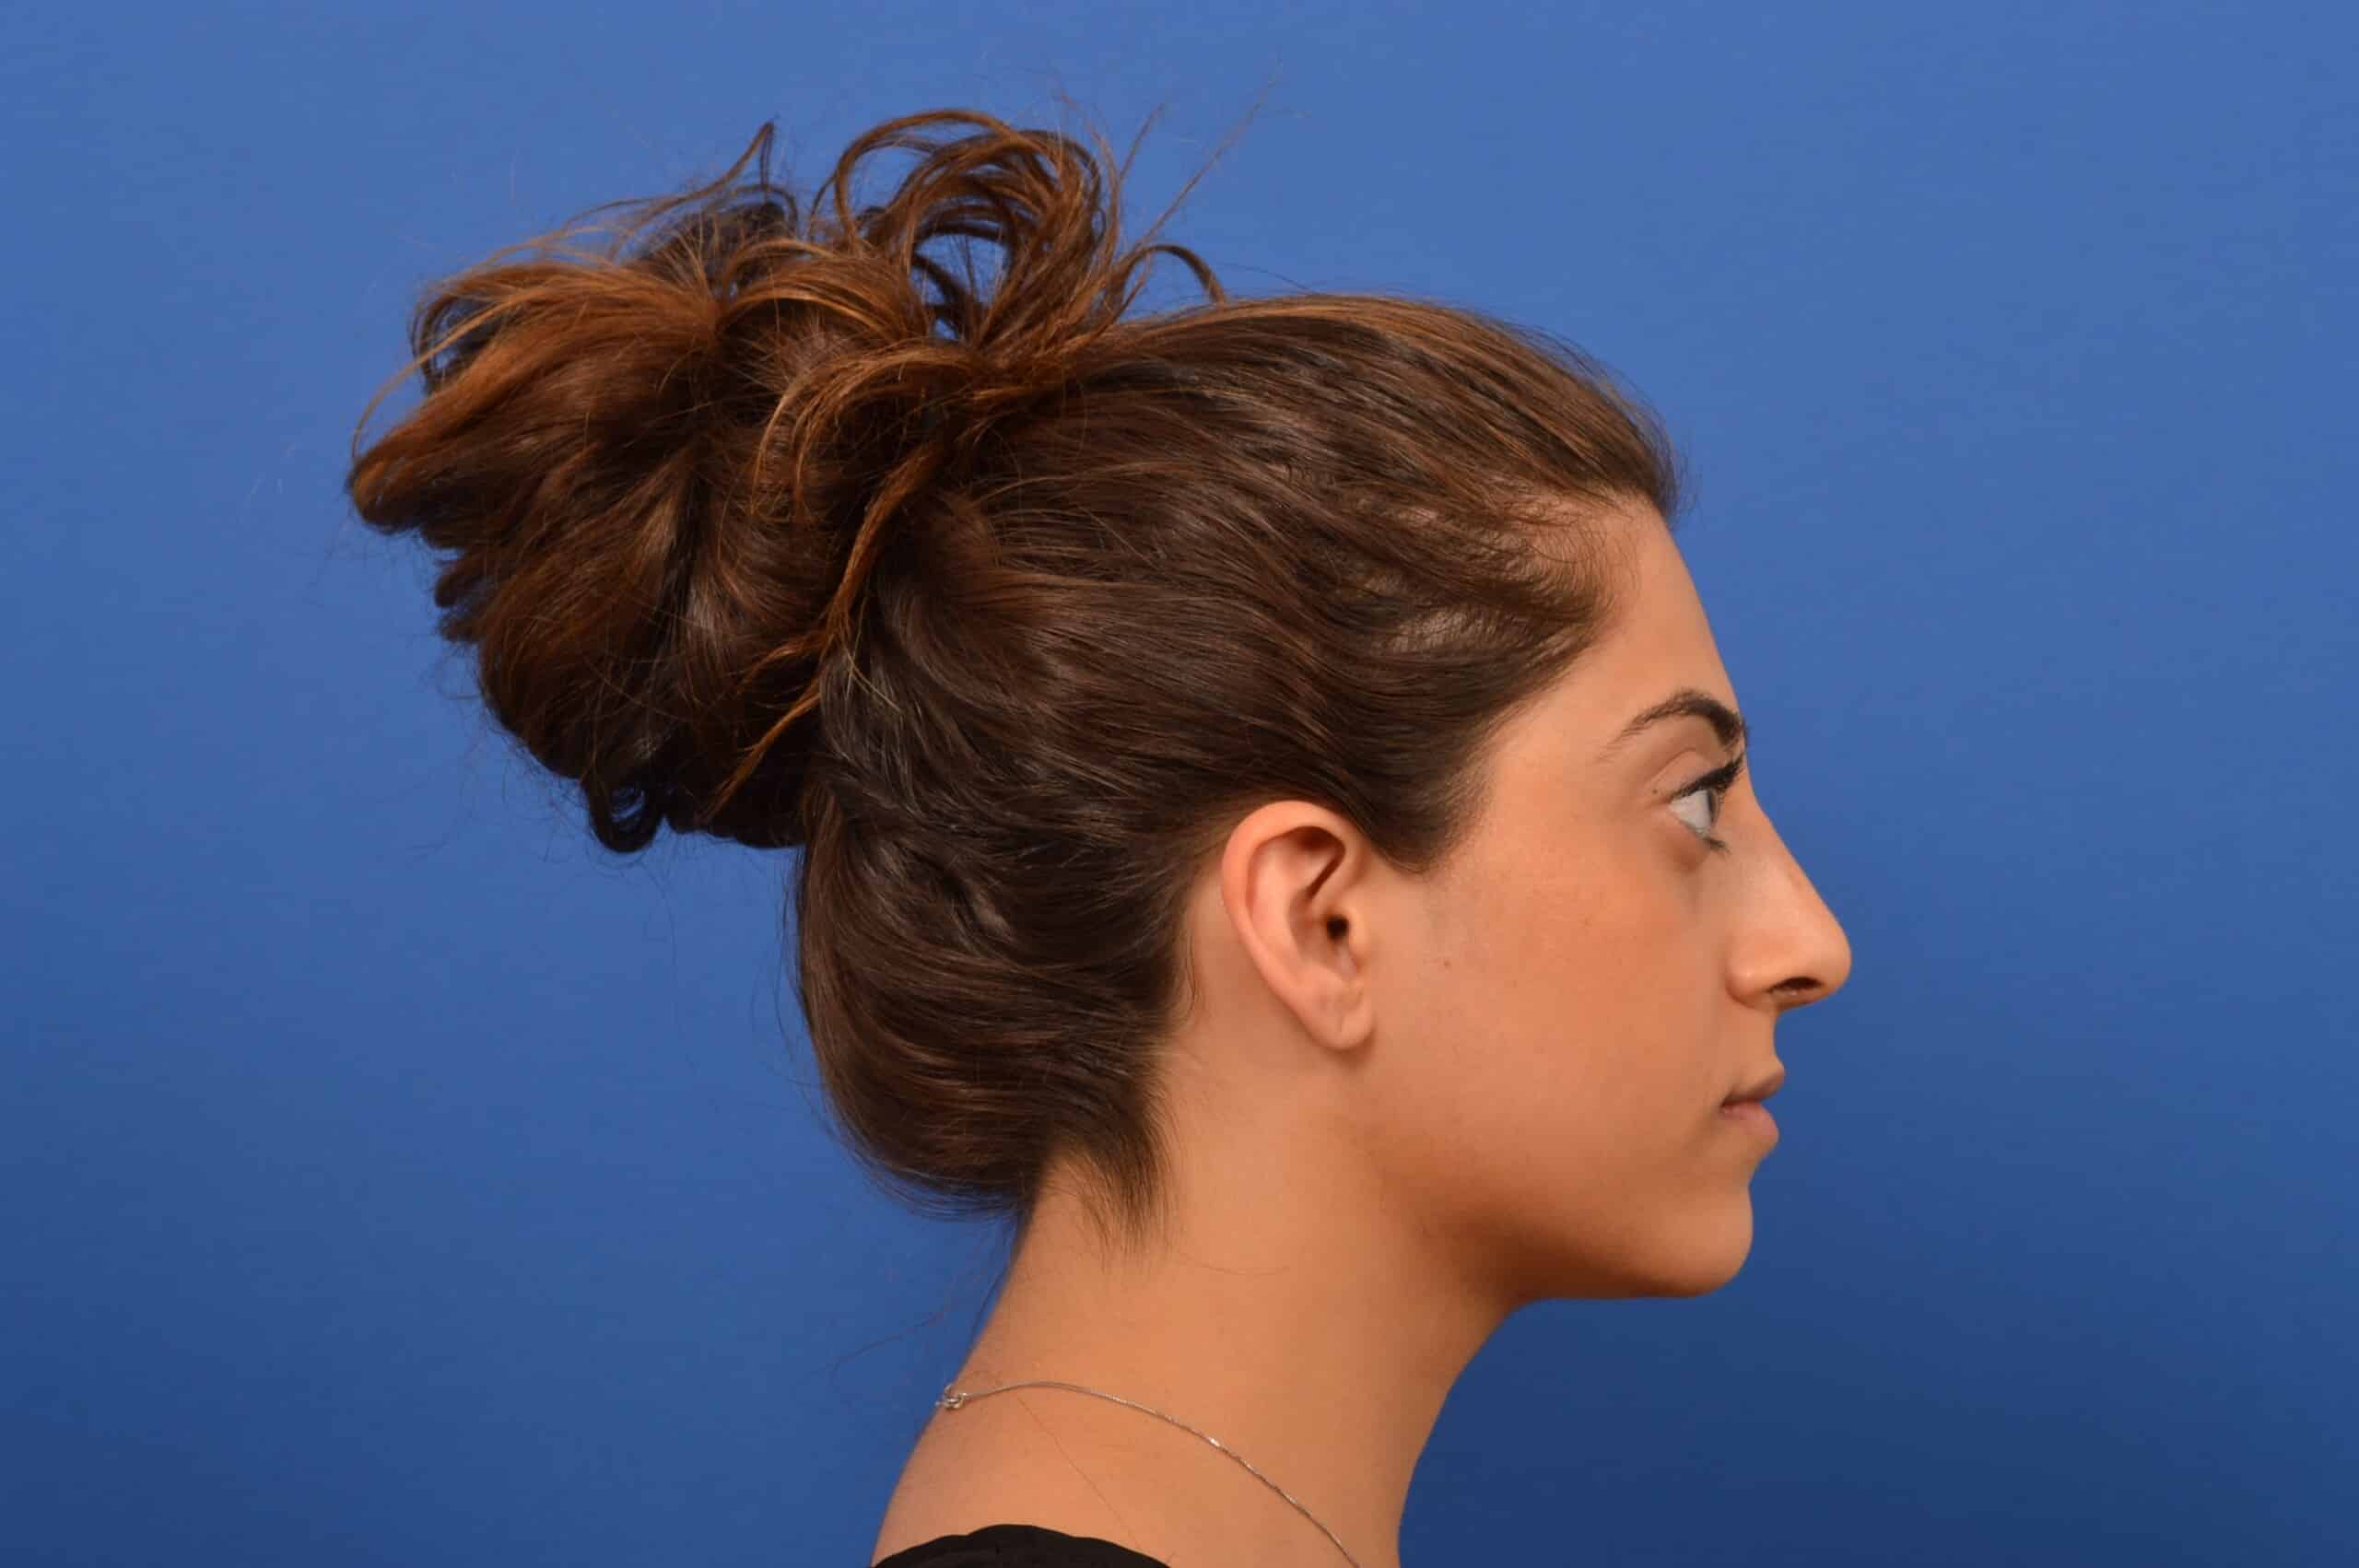 Rhinoplasty Outcome Before and After